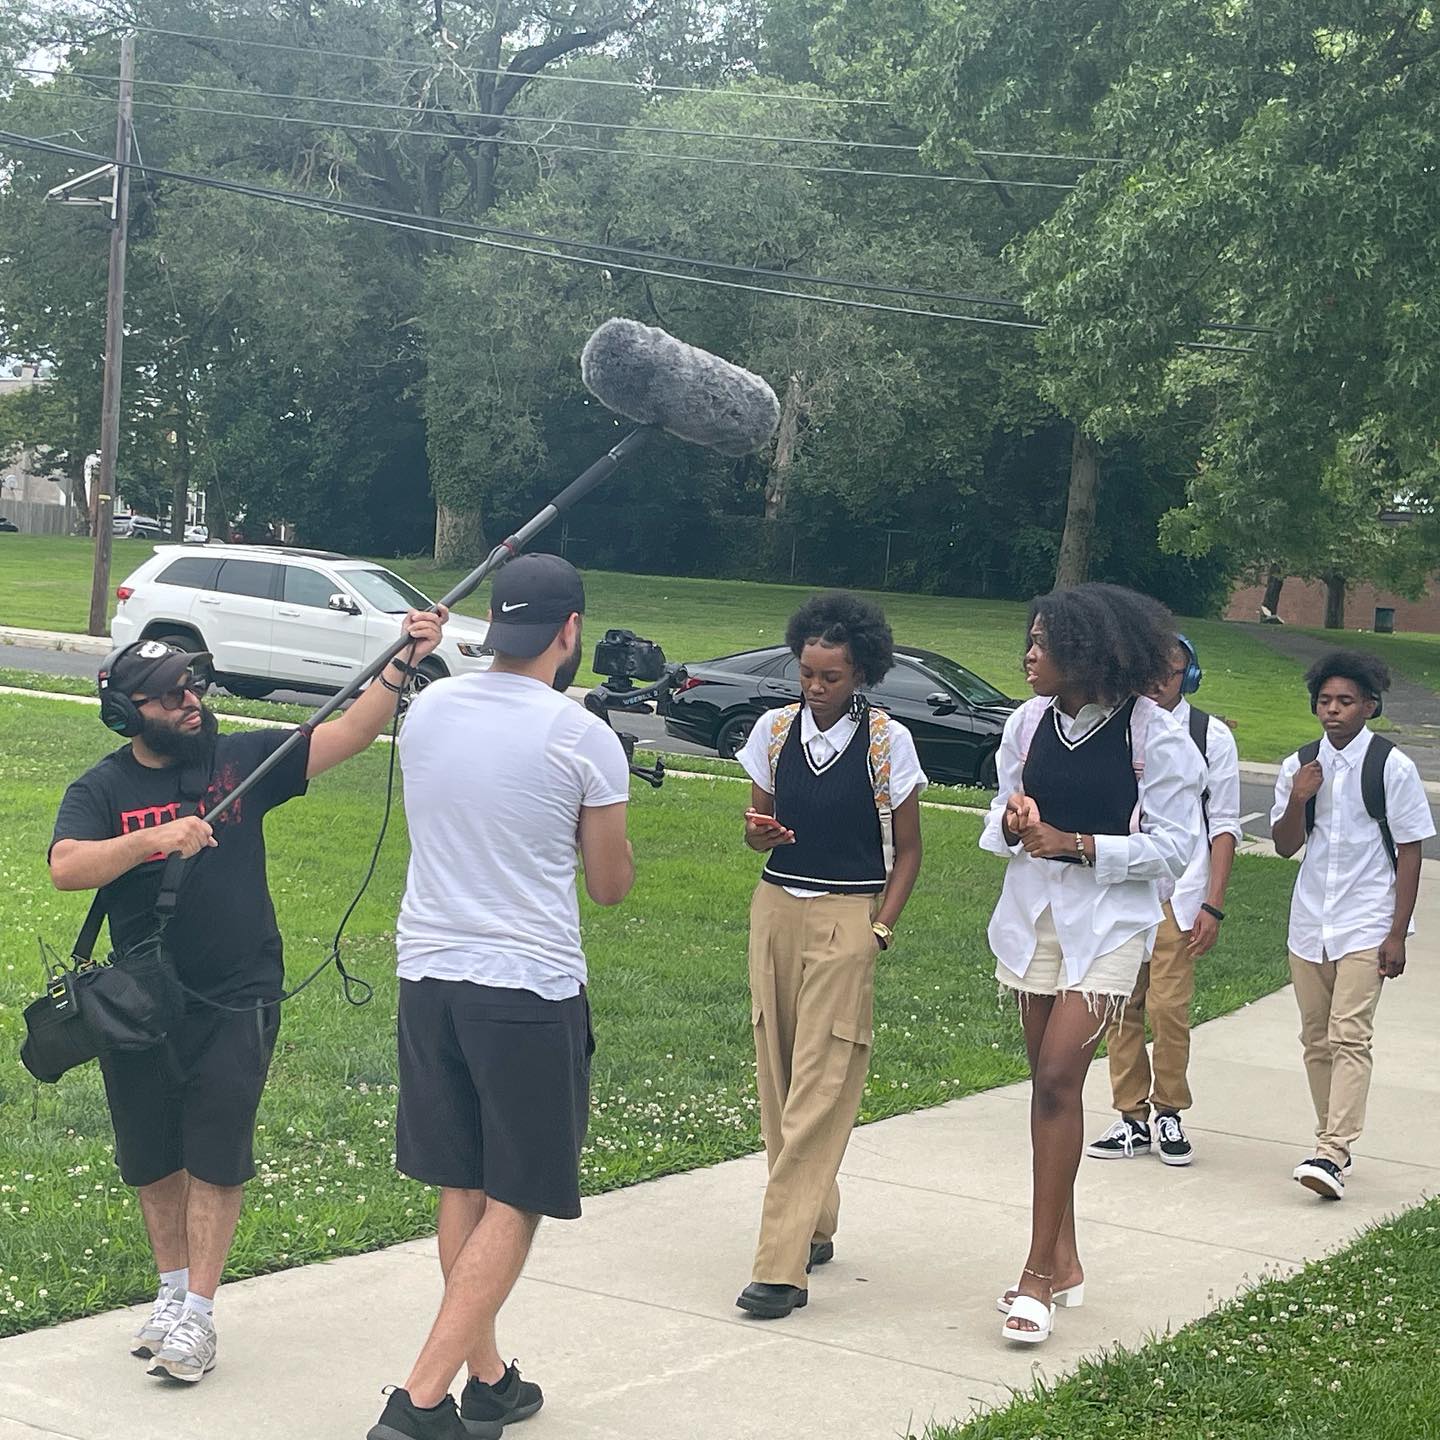 Four young people walk up a sidewalk, recorded by a man holding a video camera and another man holding a microphone boom